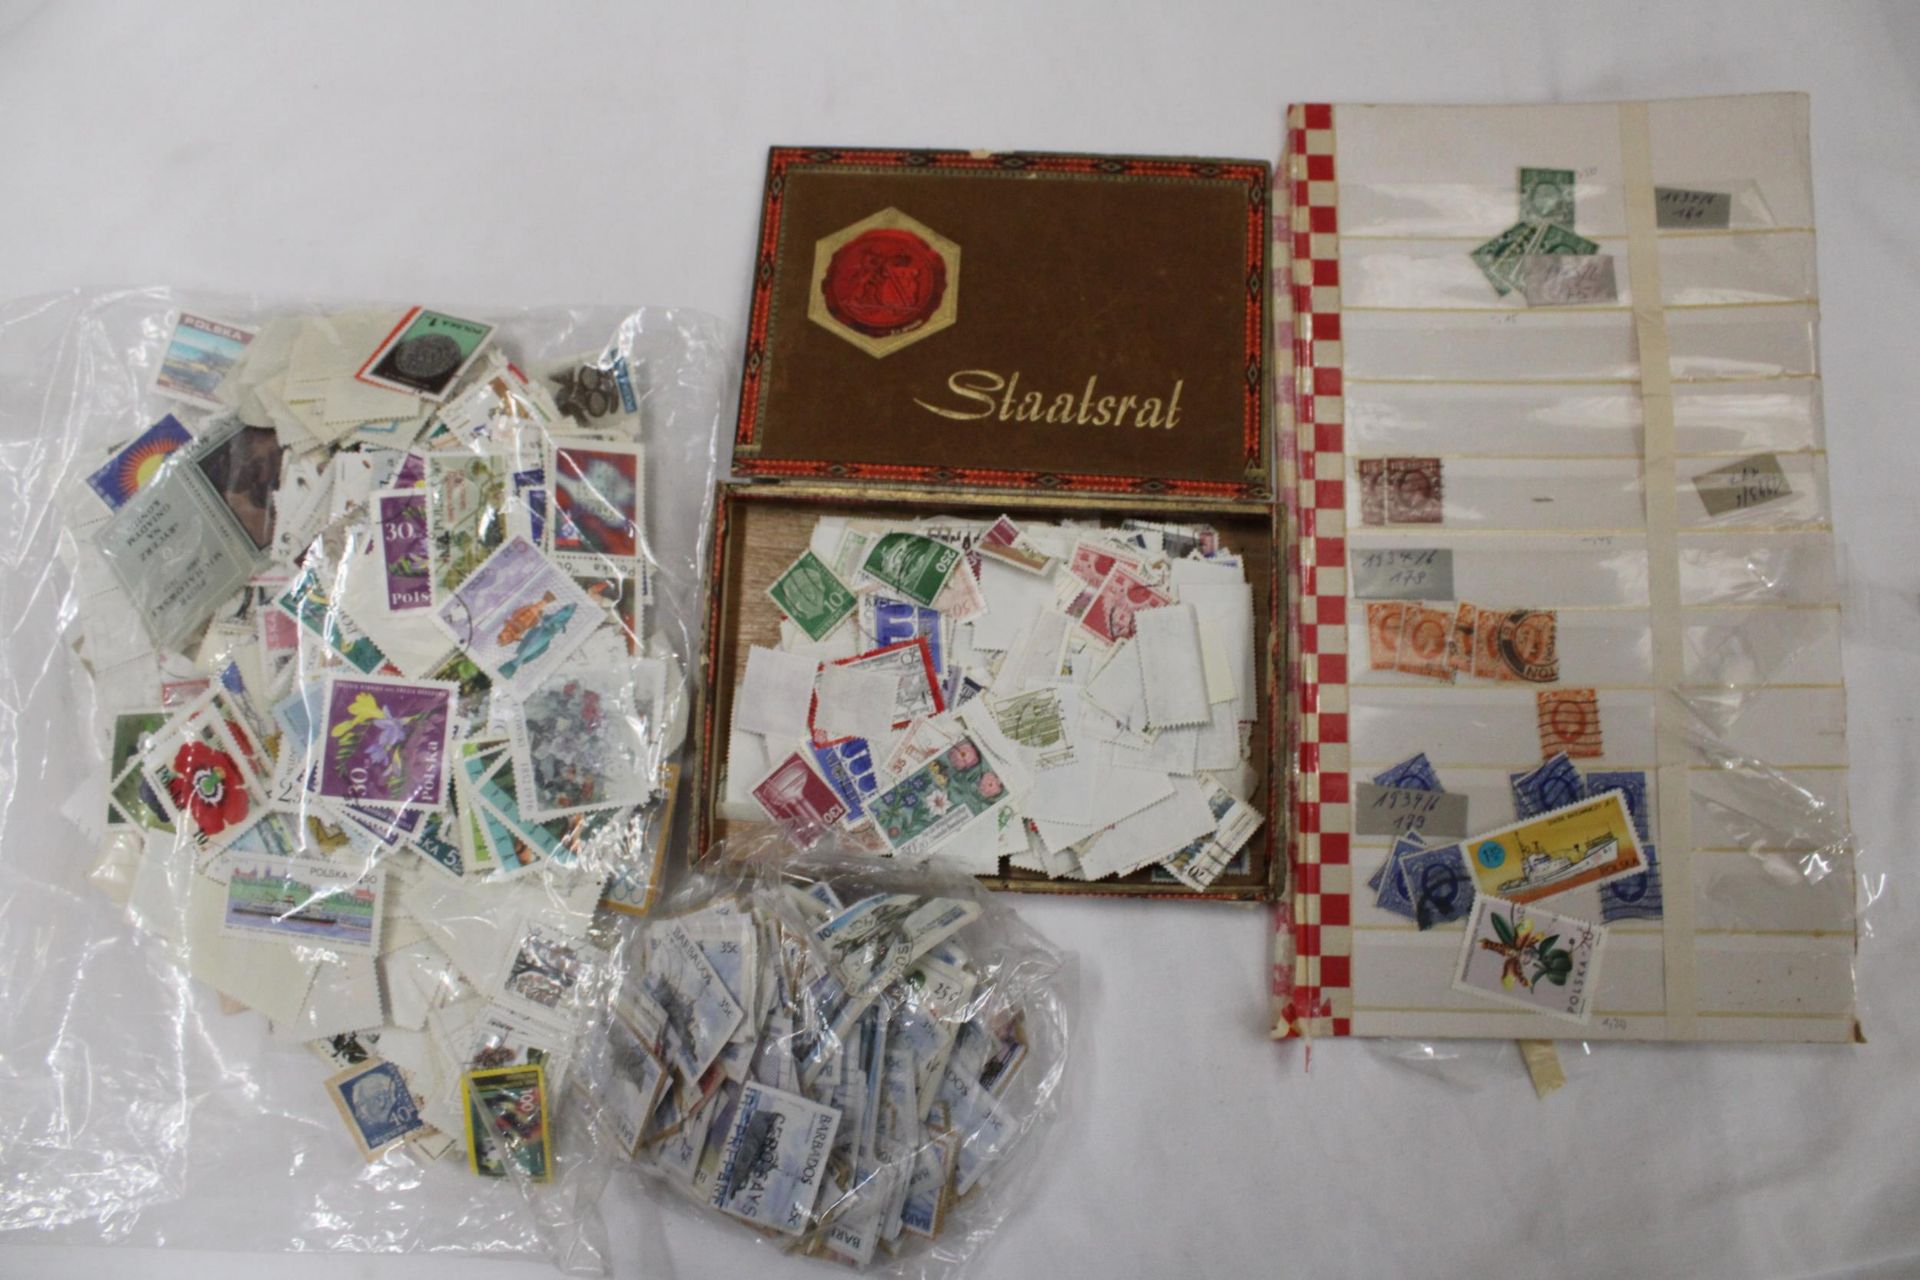 A LARGE QUANTITY OF LOOSE STAMPS FROM AROUND THE WORLD